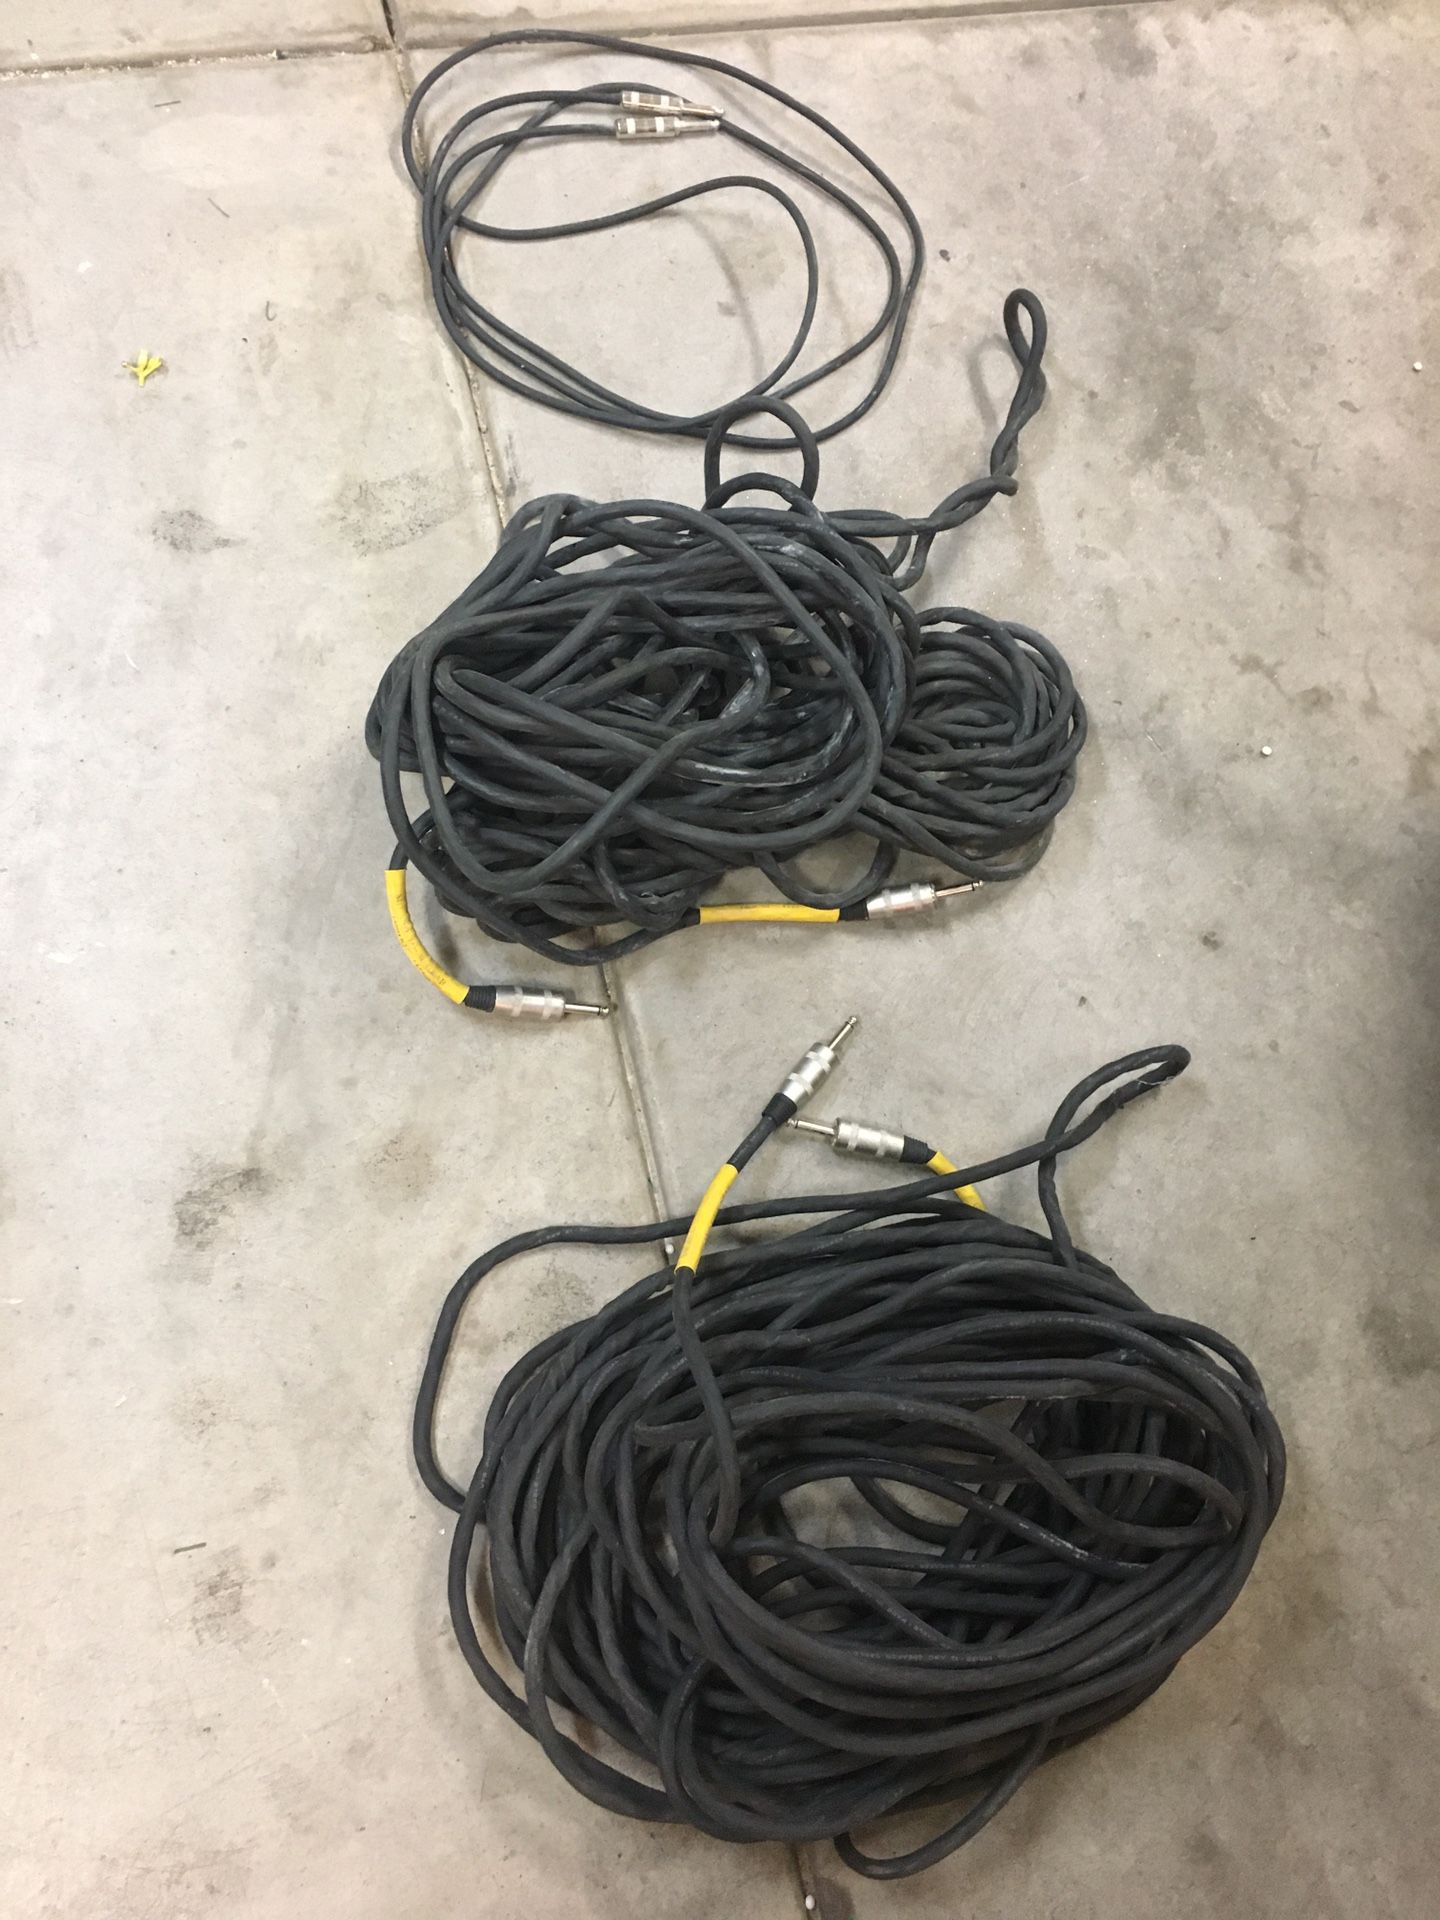 Three speaker / audio cables - all for $10